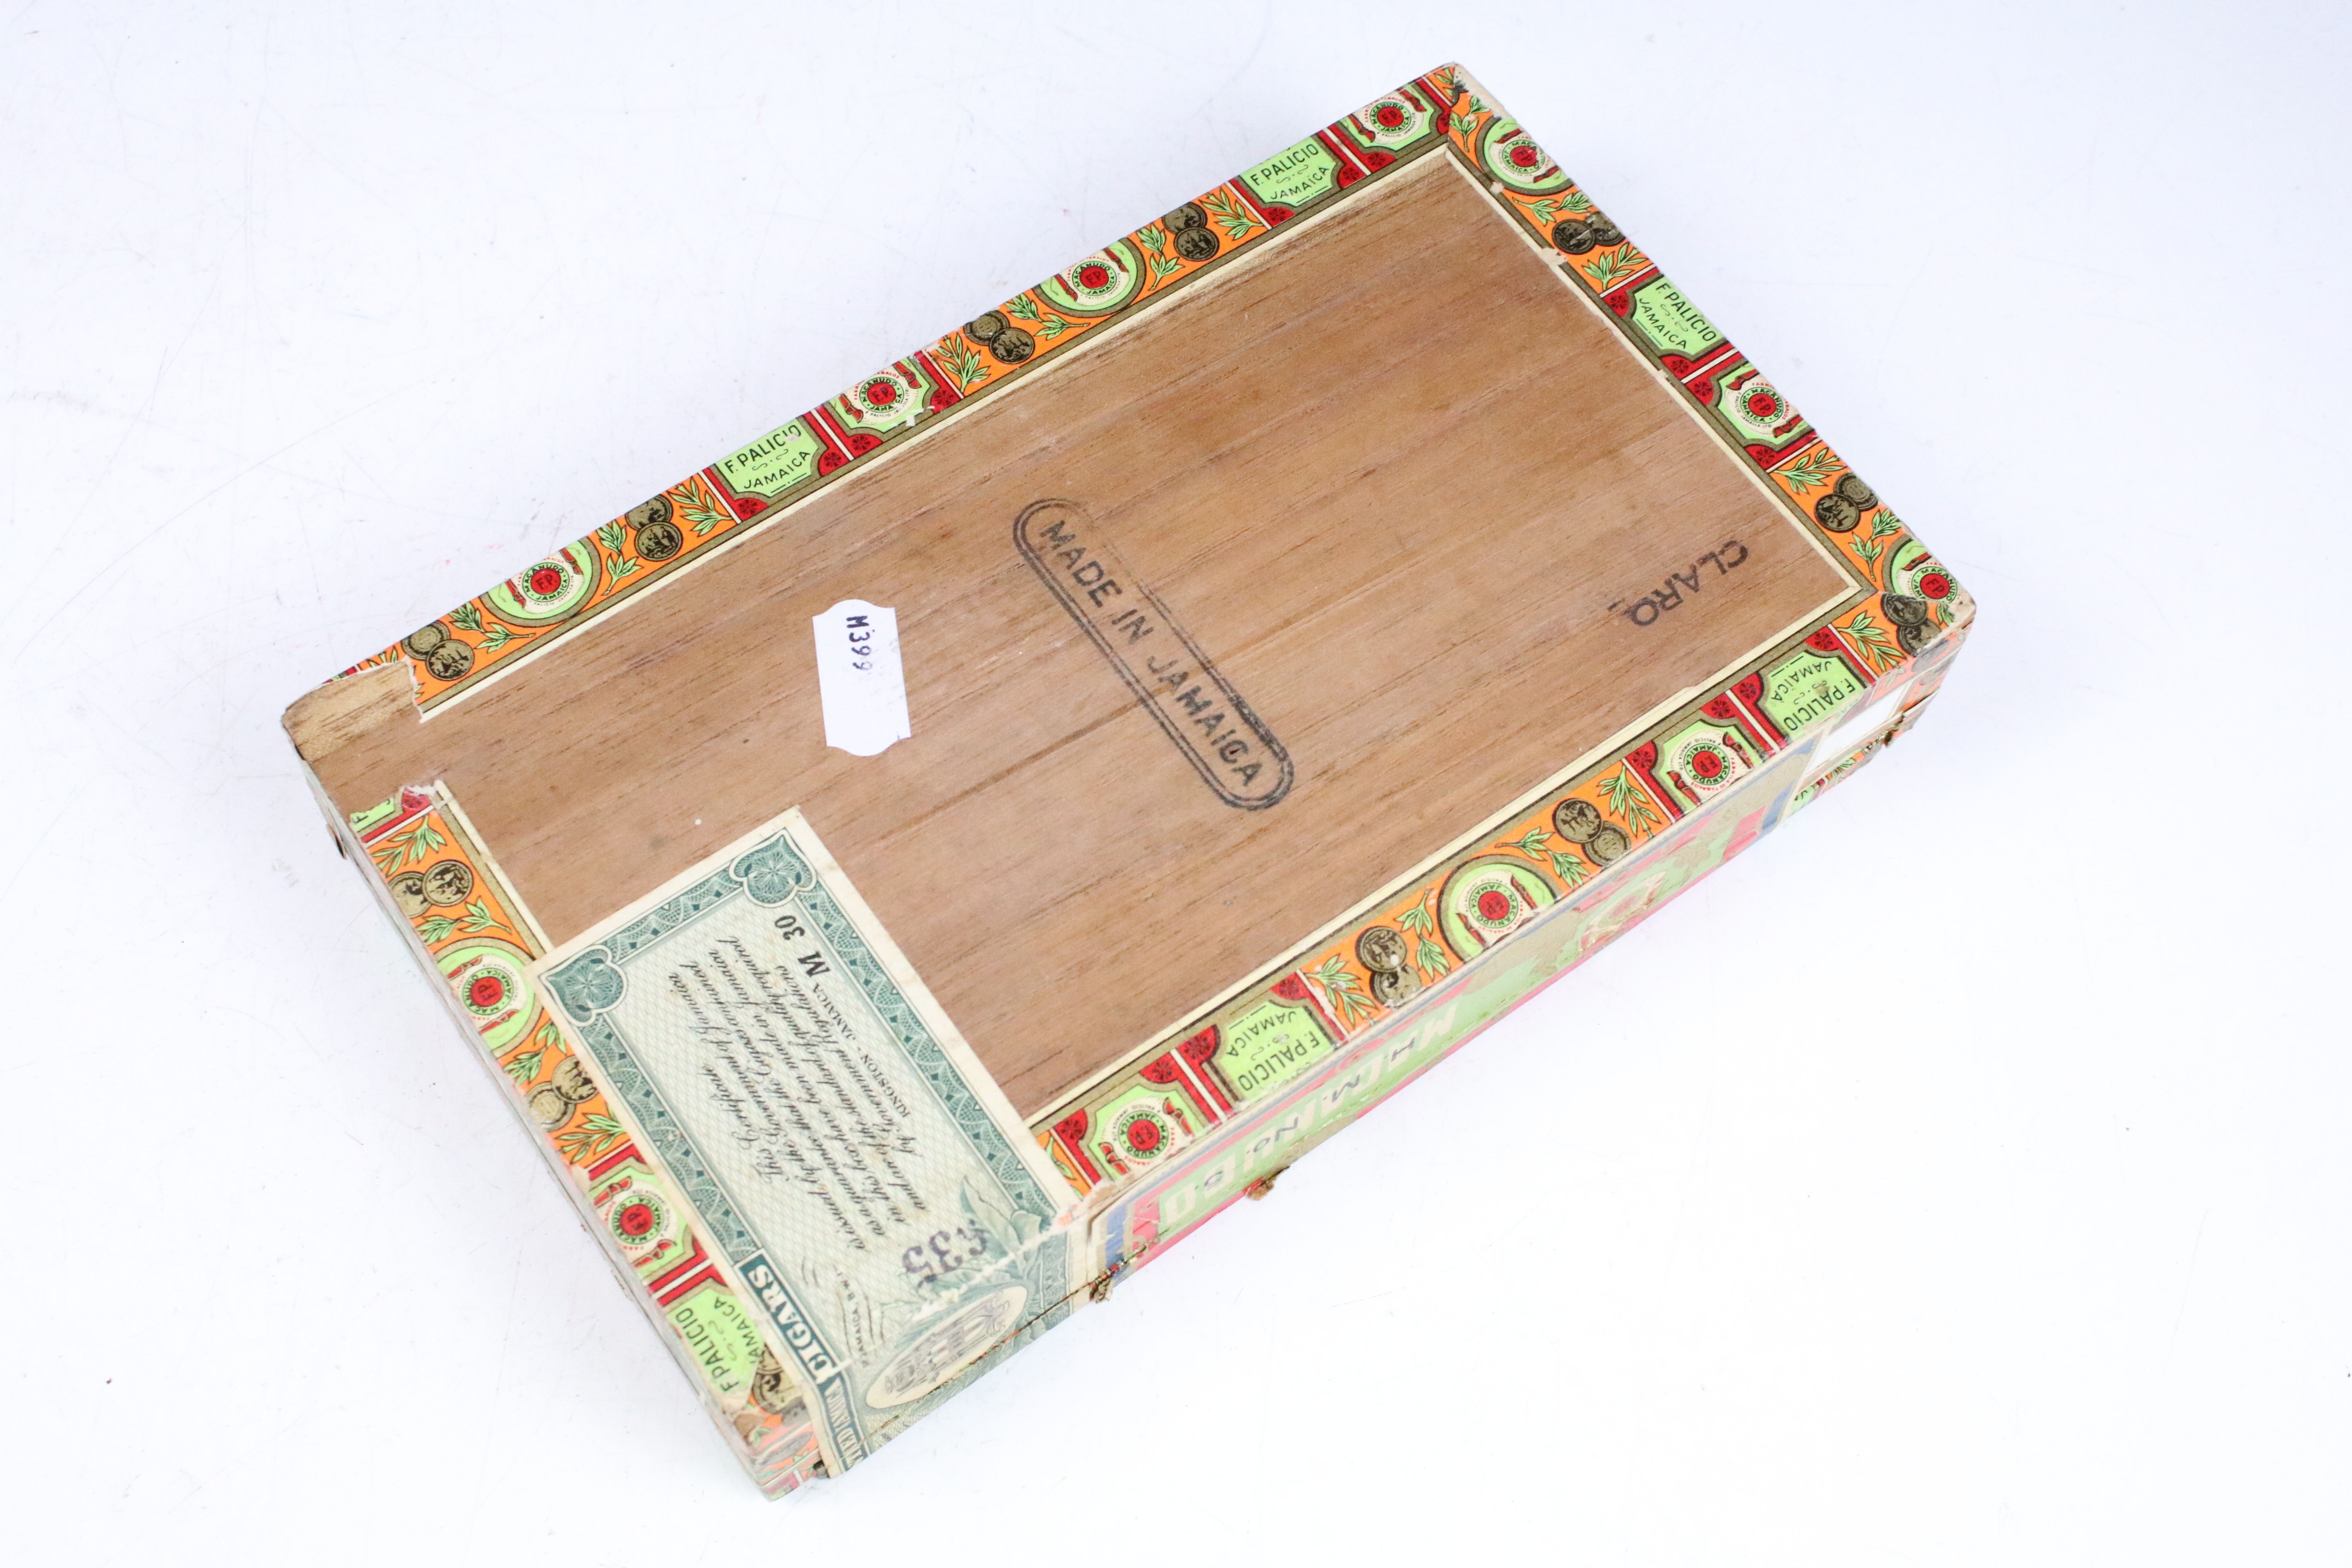 A sealed wooden box of Macanudo Jamaican cigars. - Image 3 of 4